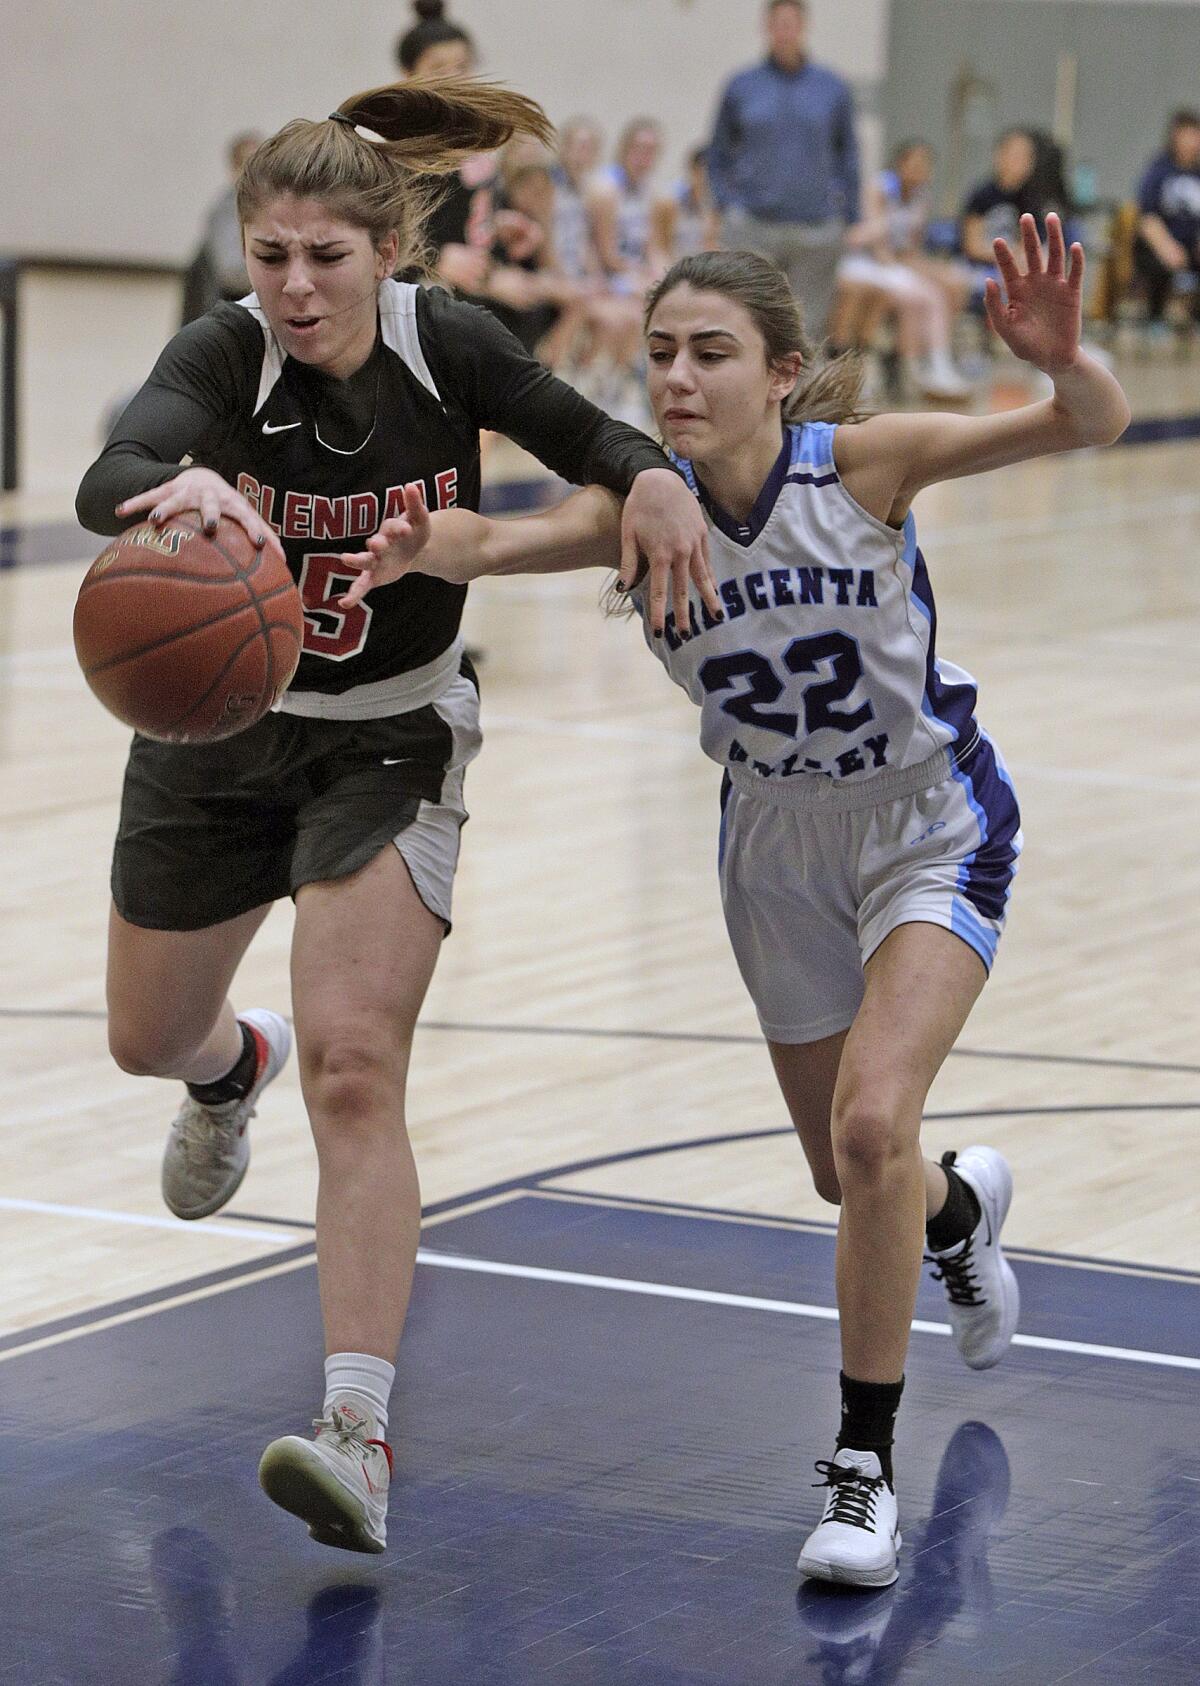 Glendale's Areco Orujyan reaches out for loose ball also being chased by Crescenta Valley's Katrina Minassian in a Pacific League girls' basketball game at Crescenta Valley High School on Tuesday, January 7, 2020.